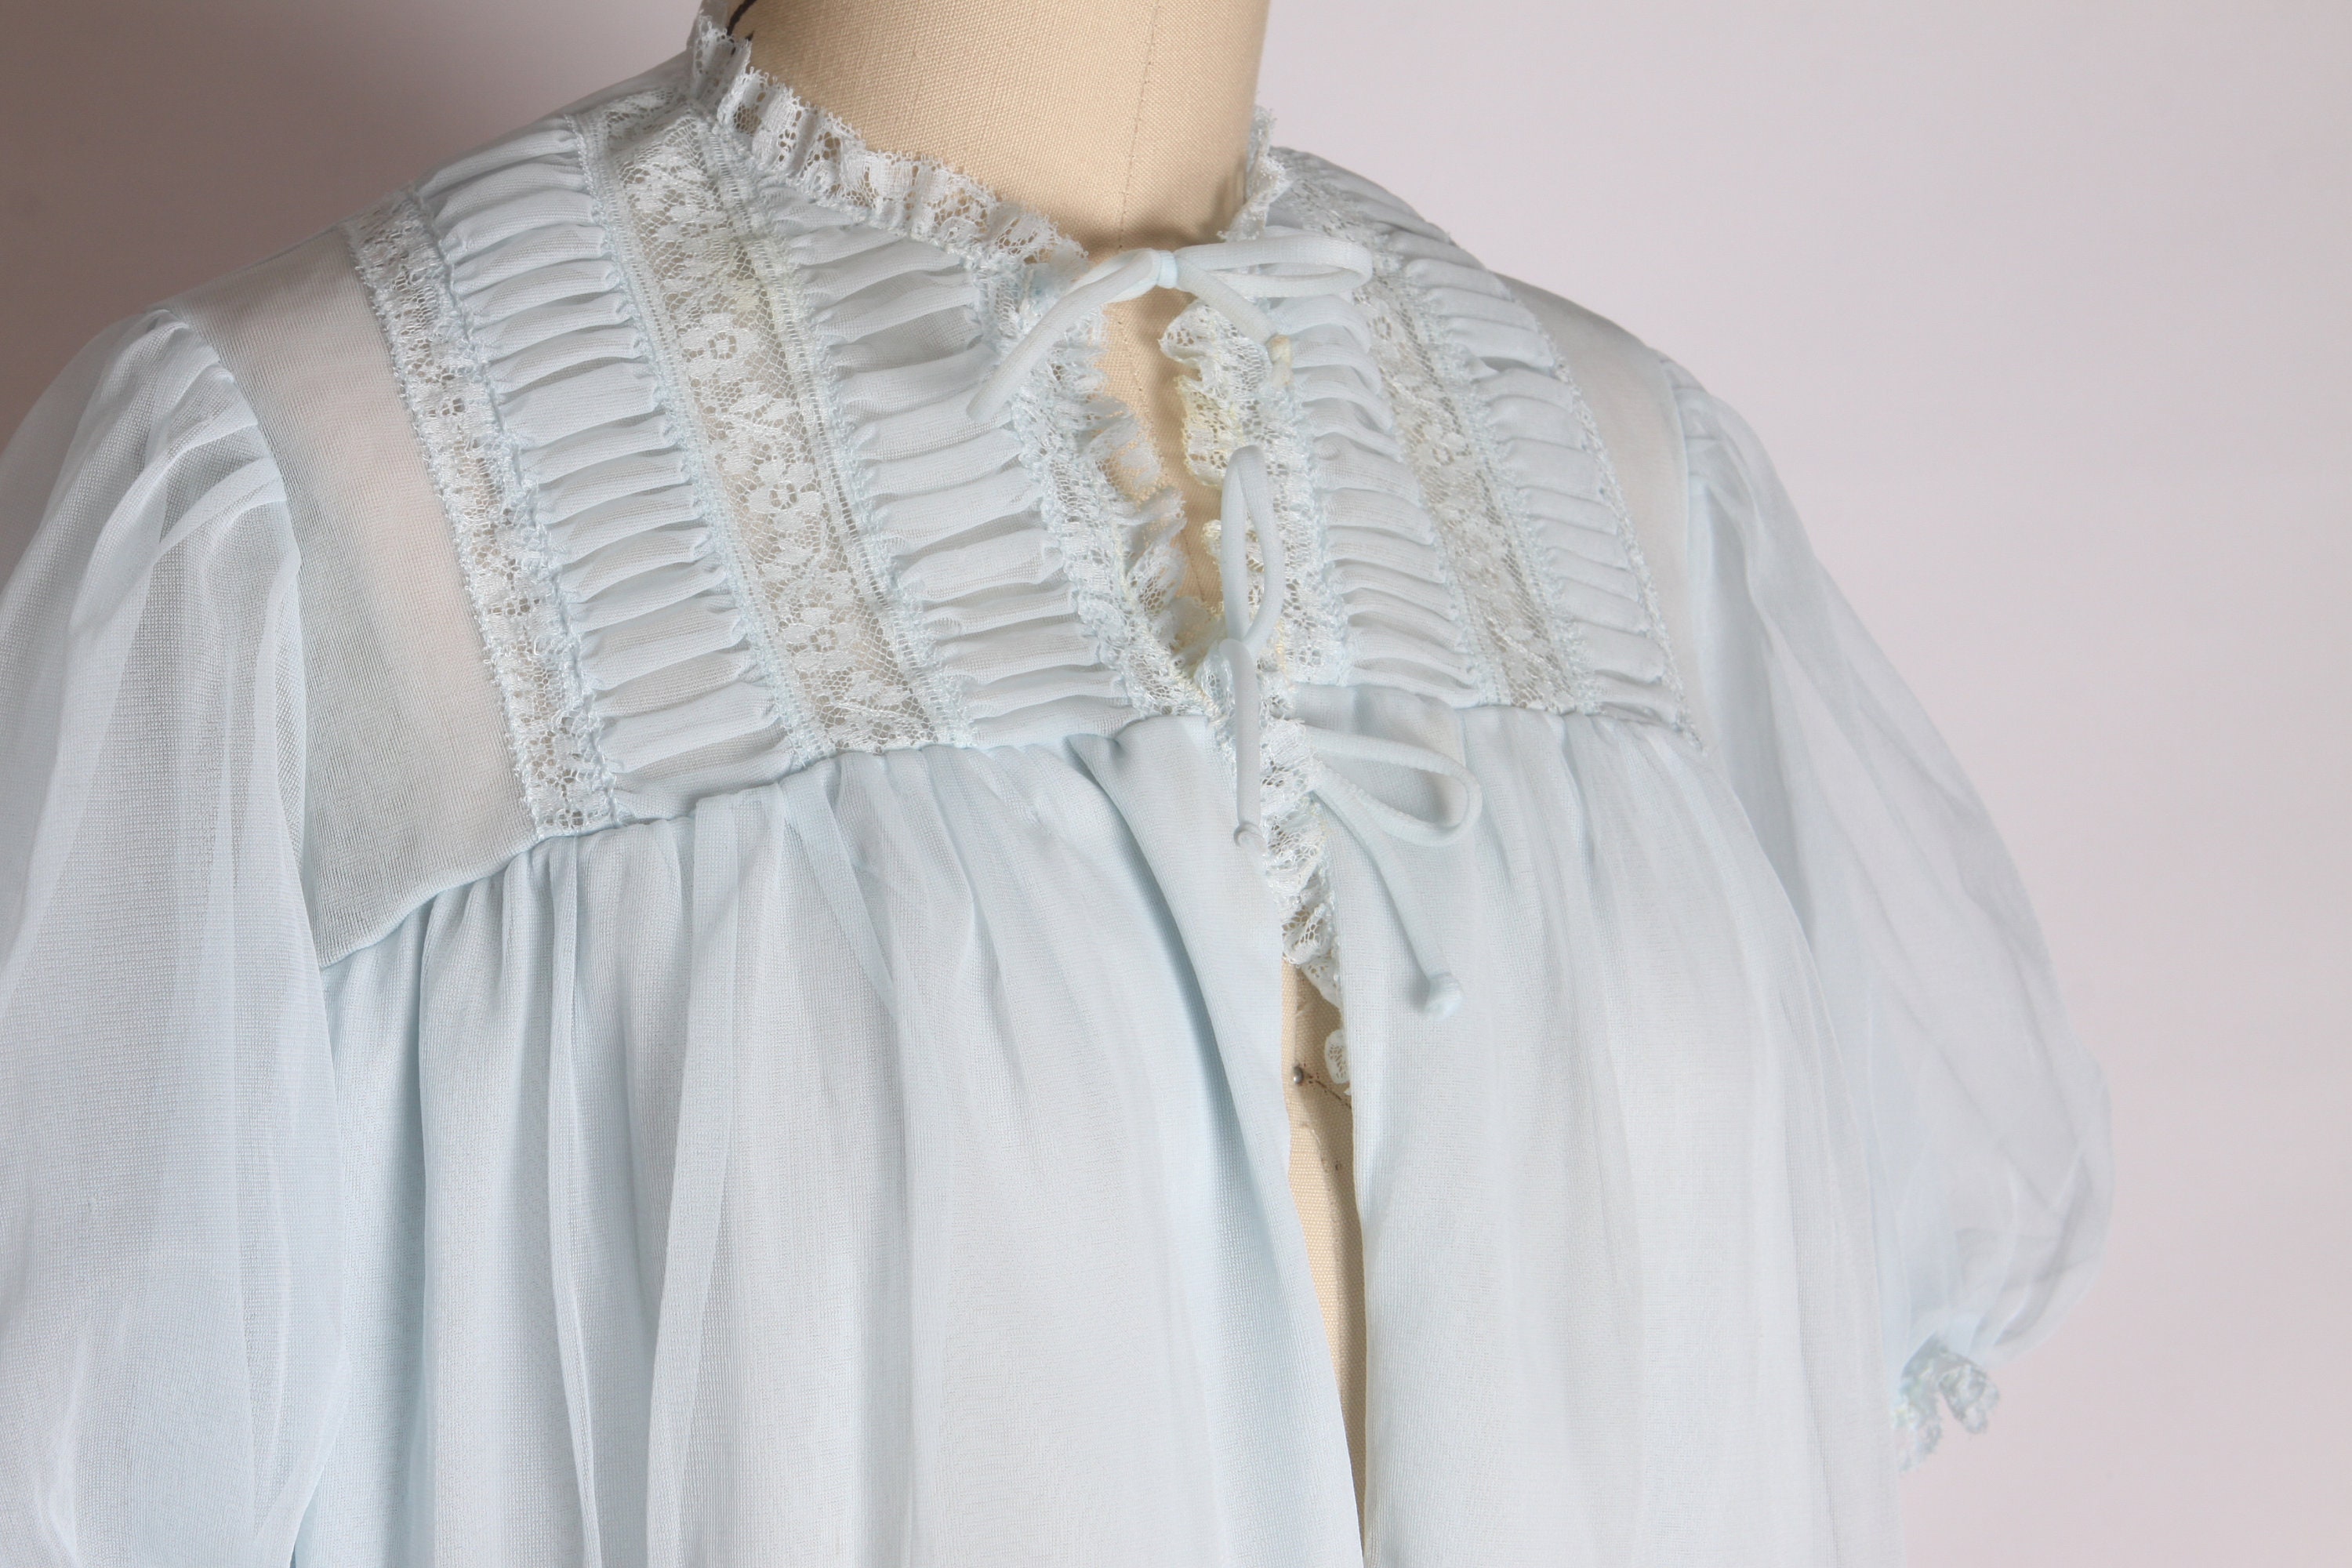 1950s Pale Blue Ruffle Frilly Lace Nylon Lingerie Bed Jacket by Snowdon -S